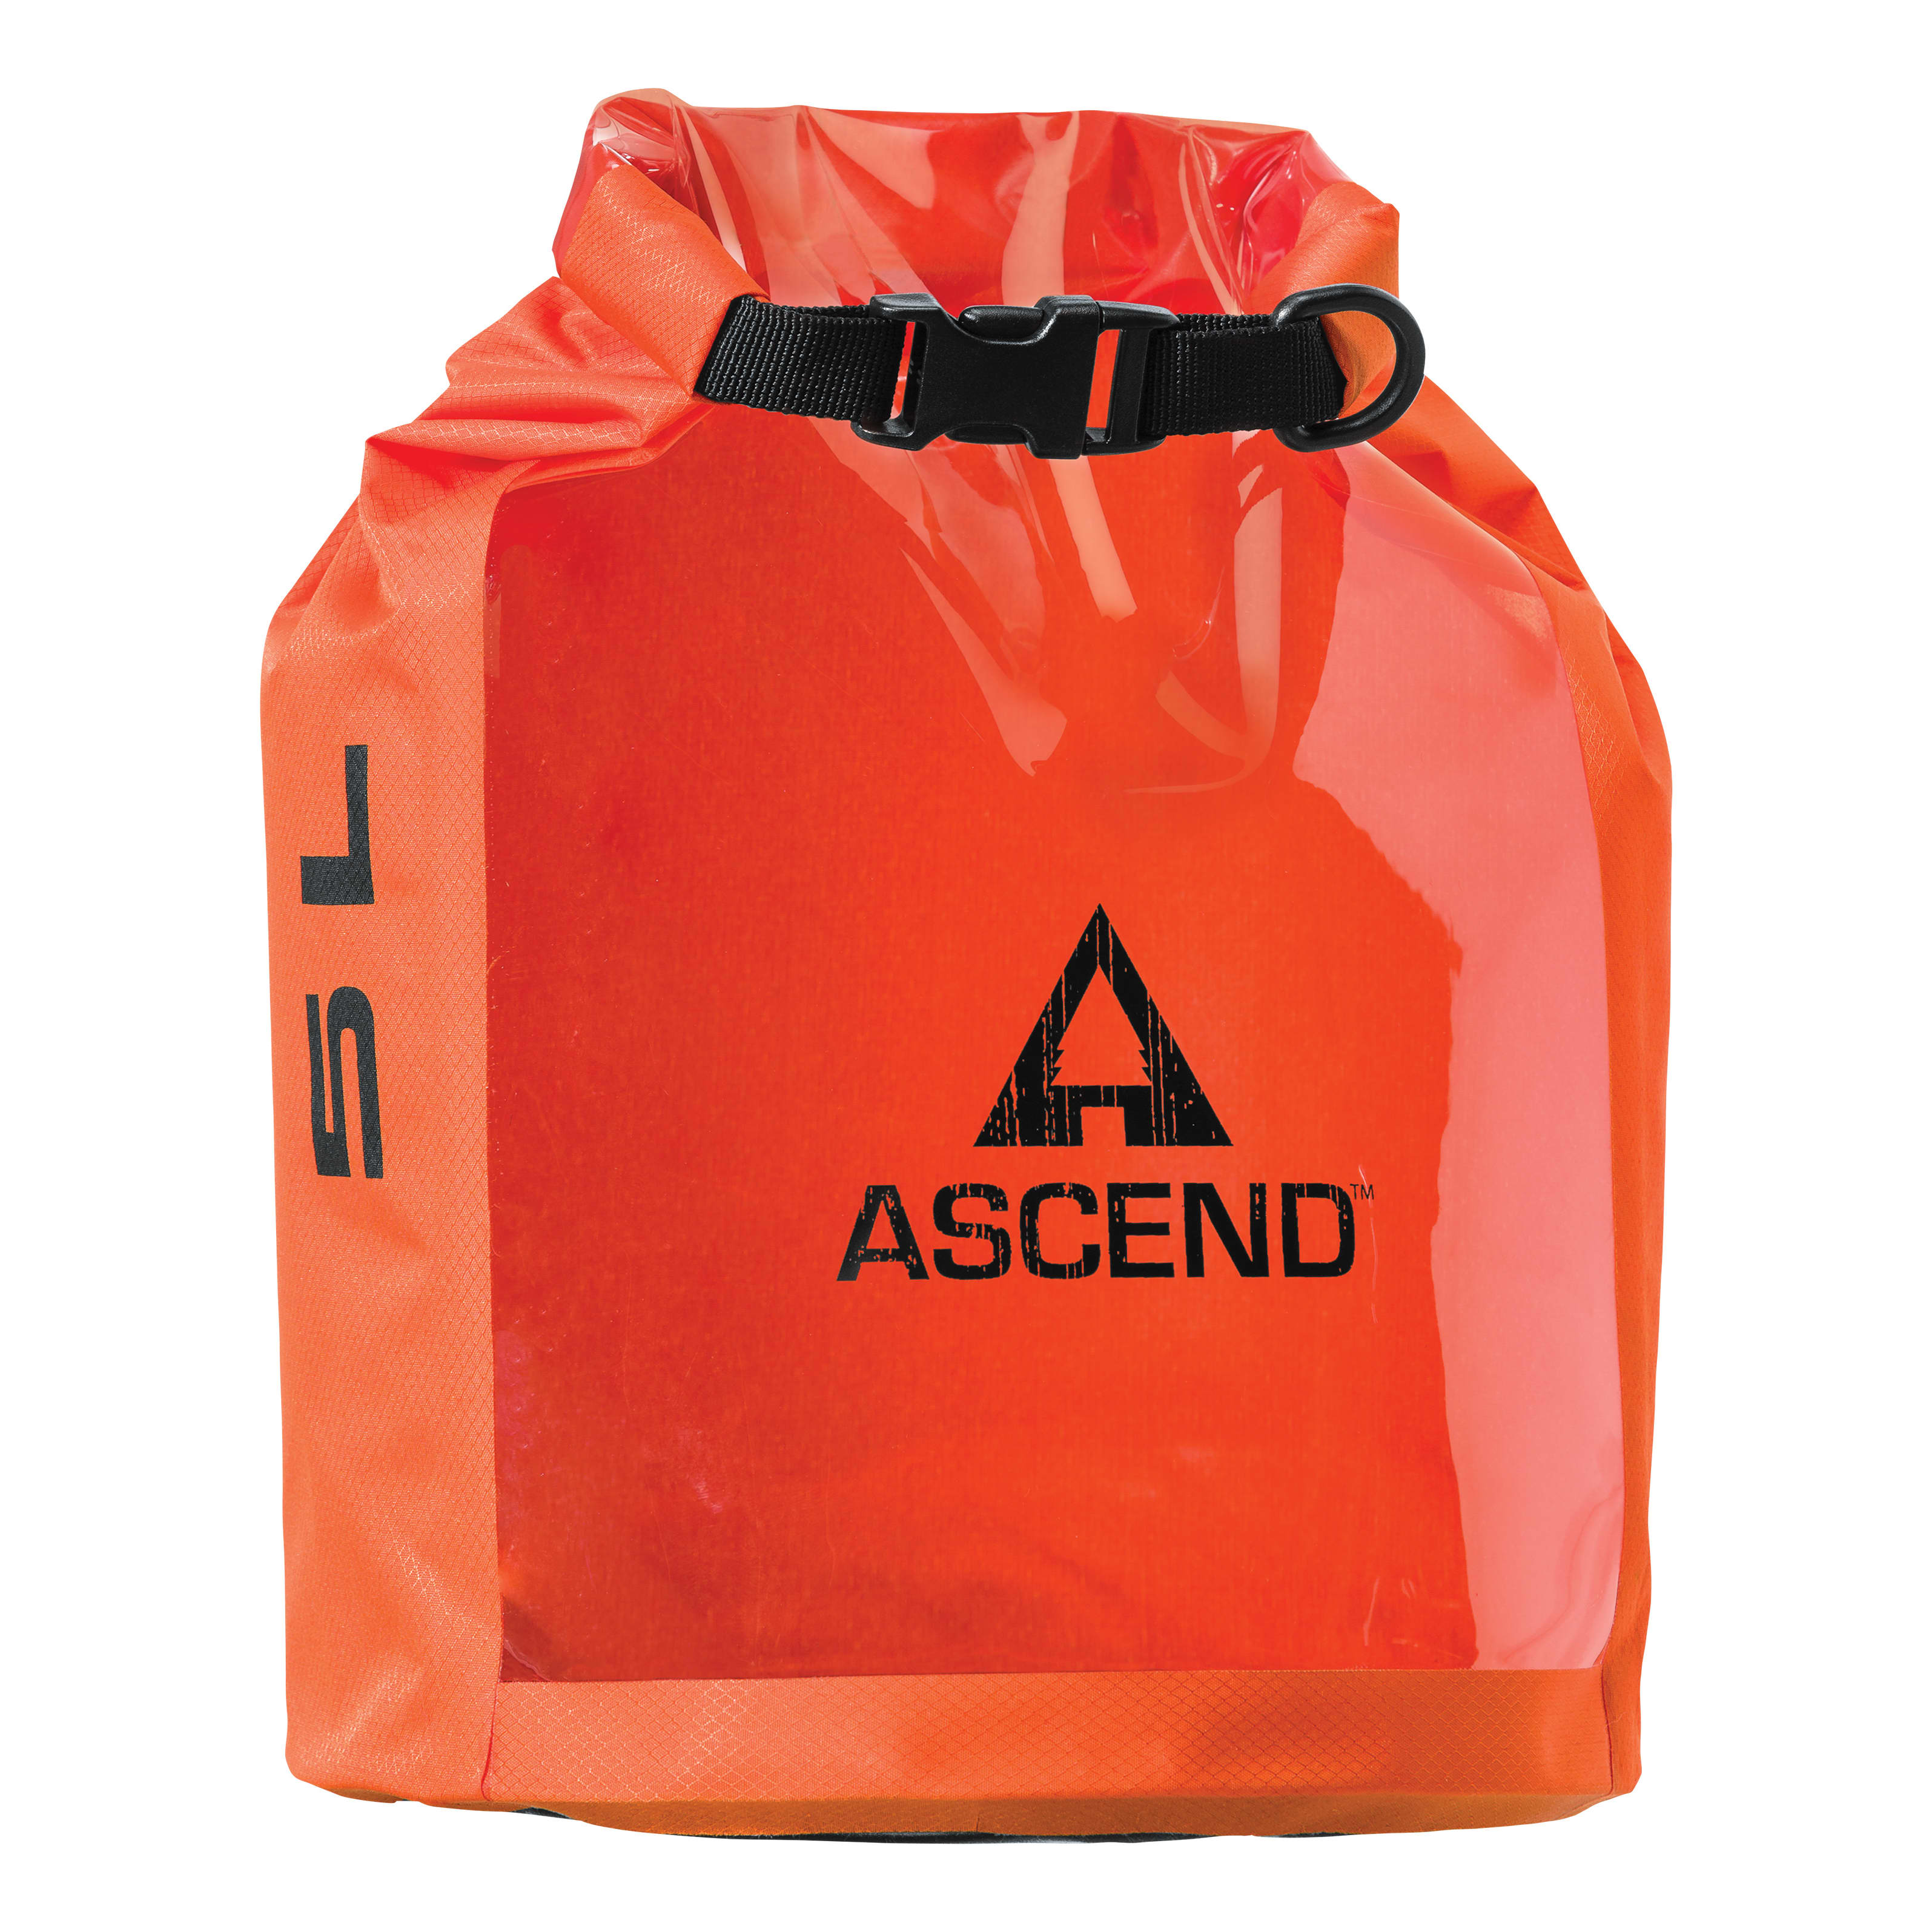 Ascend® Lightweight Dry Bag with Window - 5 Litre